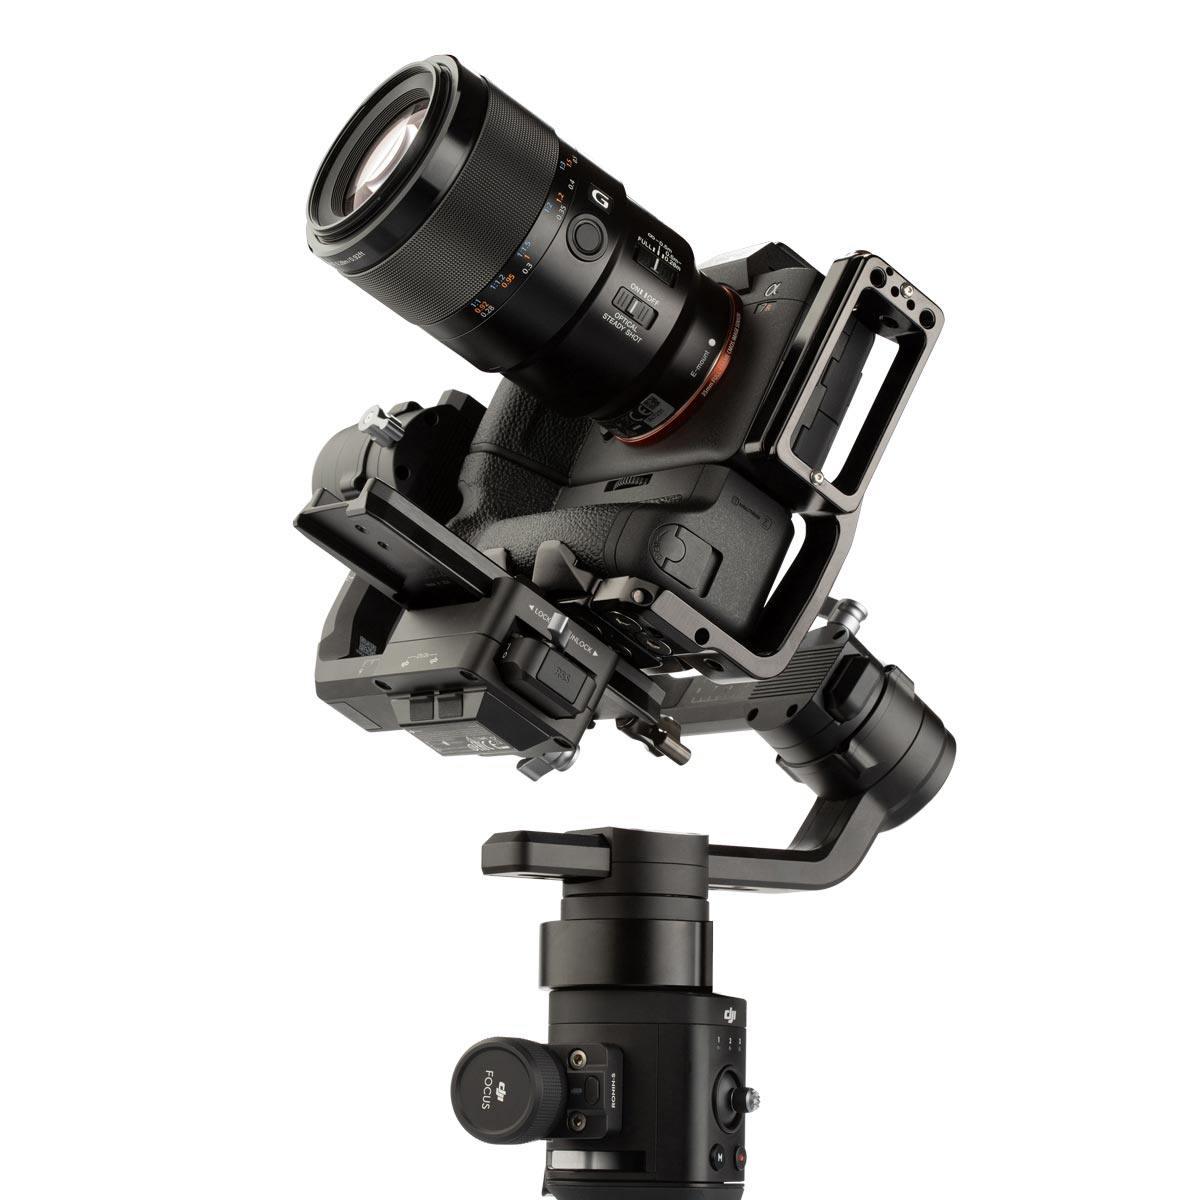 Mounted on DJI Ronin S with Sony A7R Mark IV camera